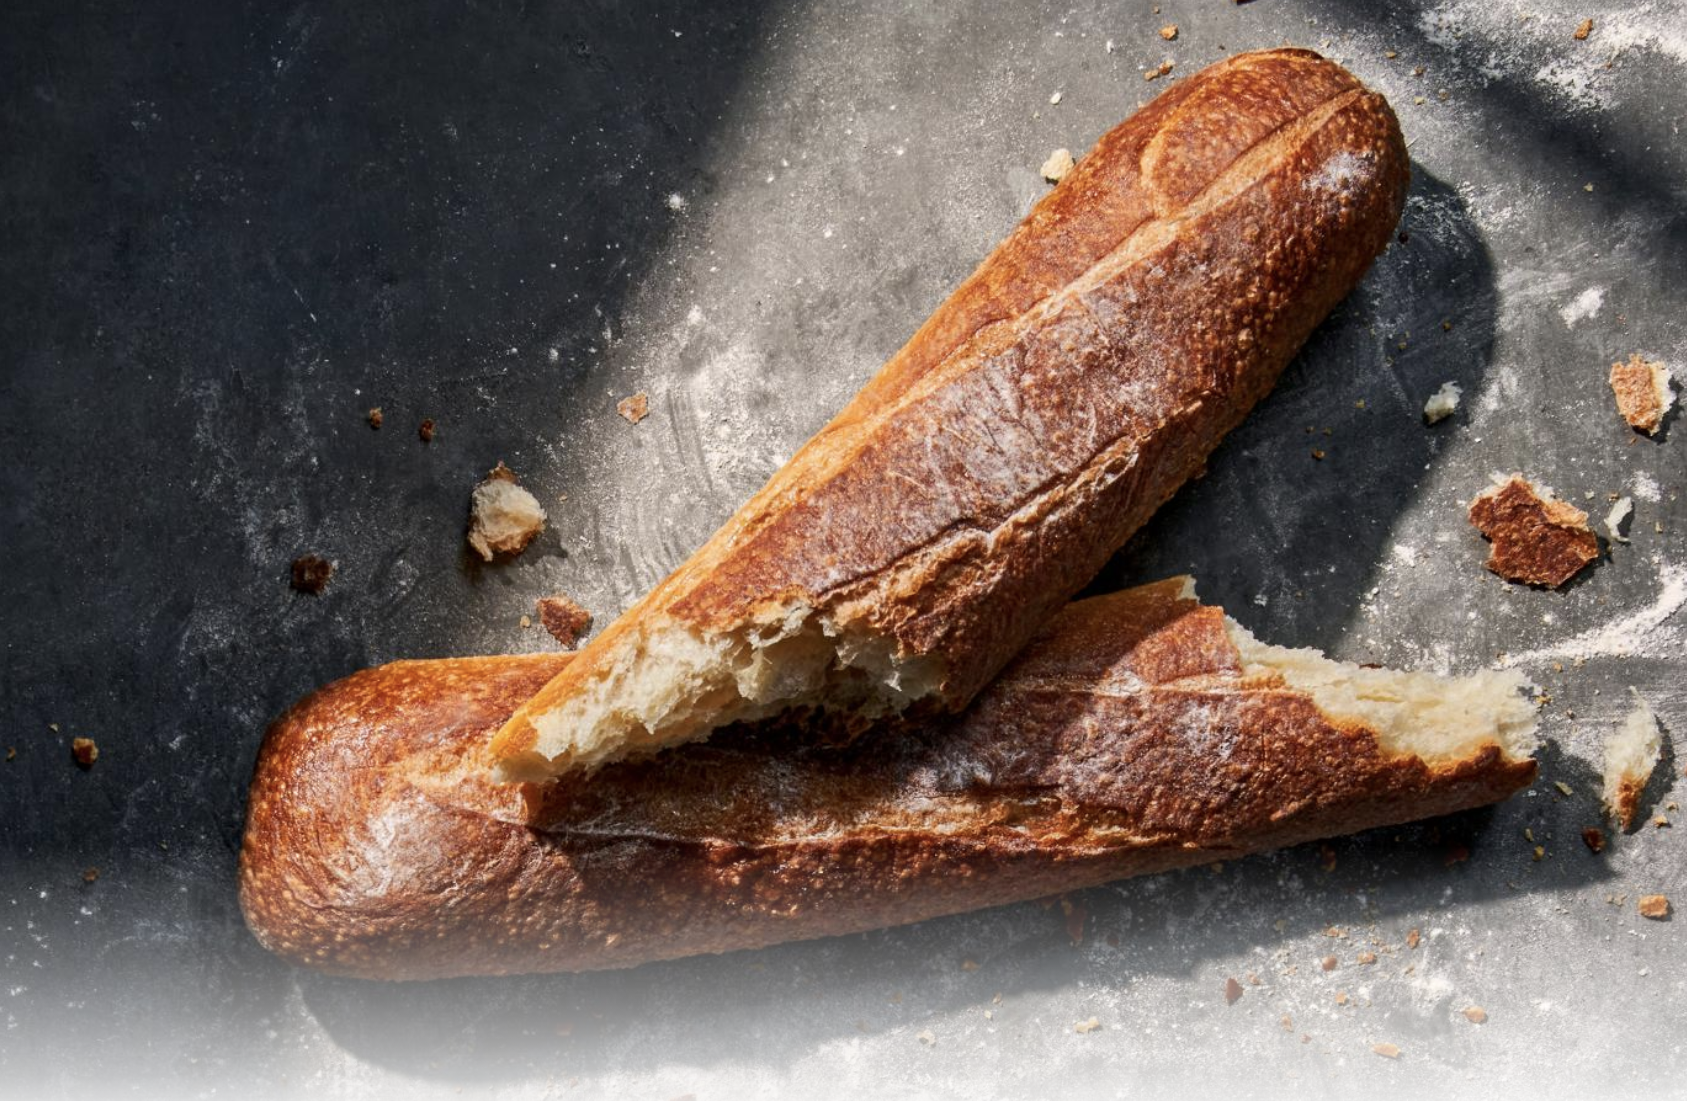 baguette from Panera Bread